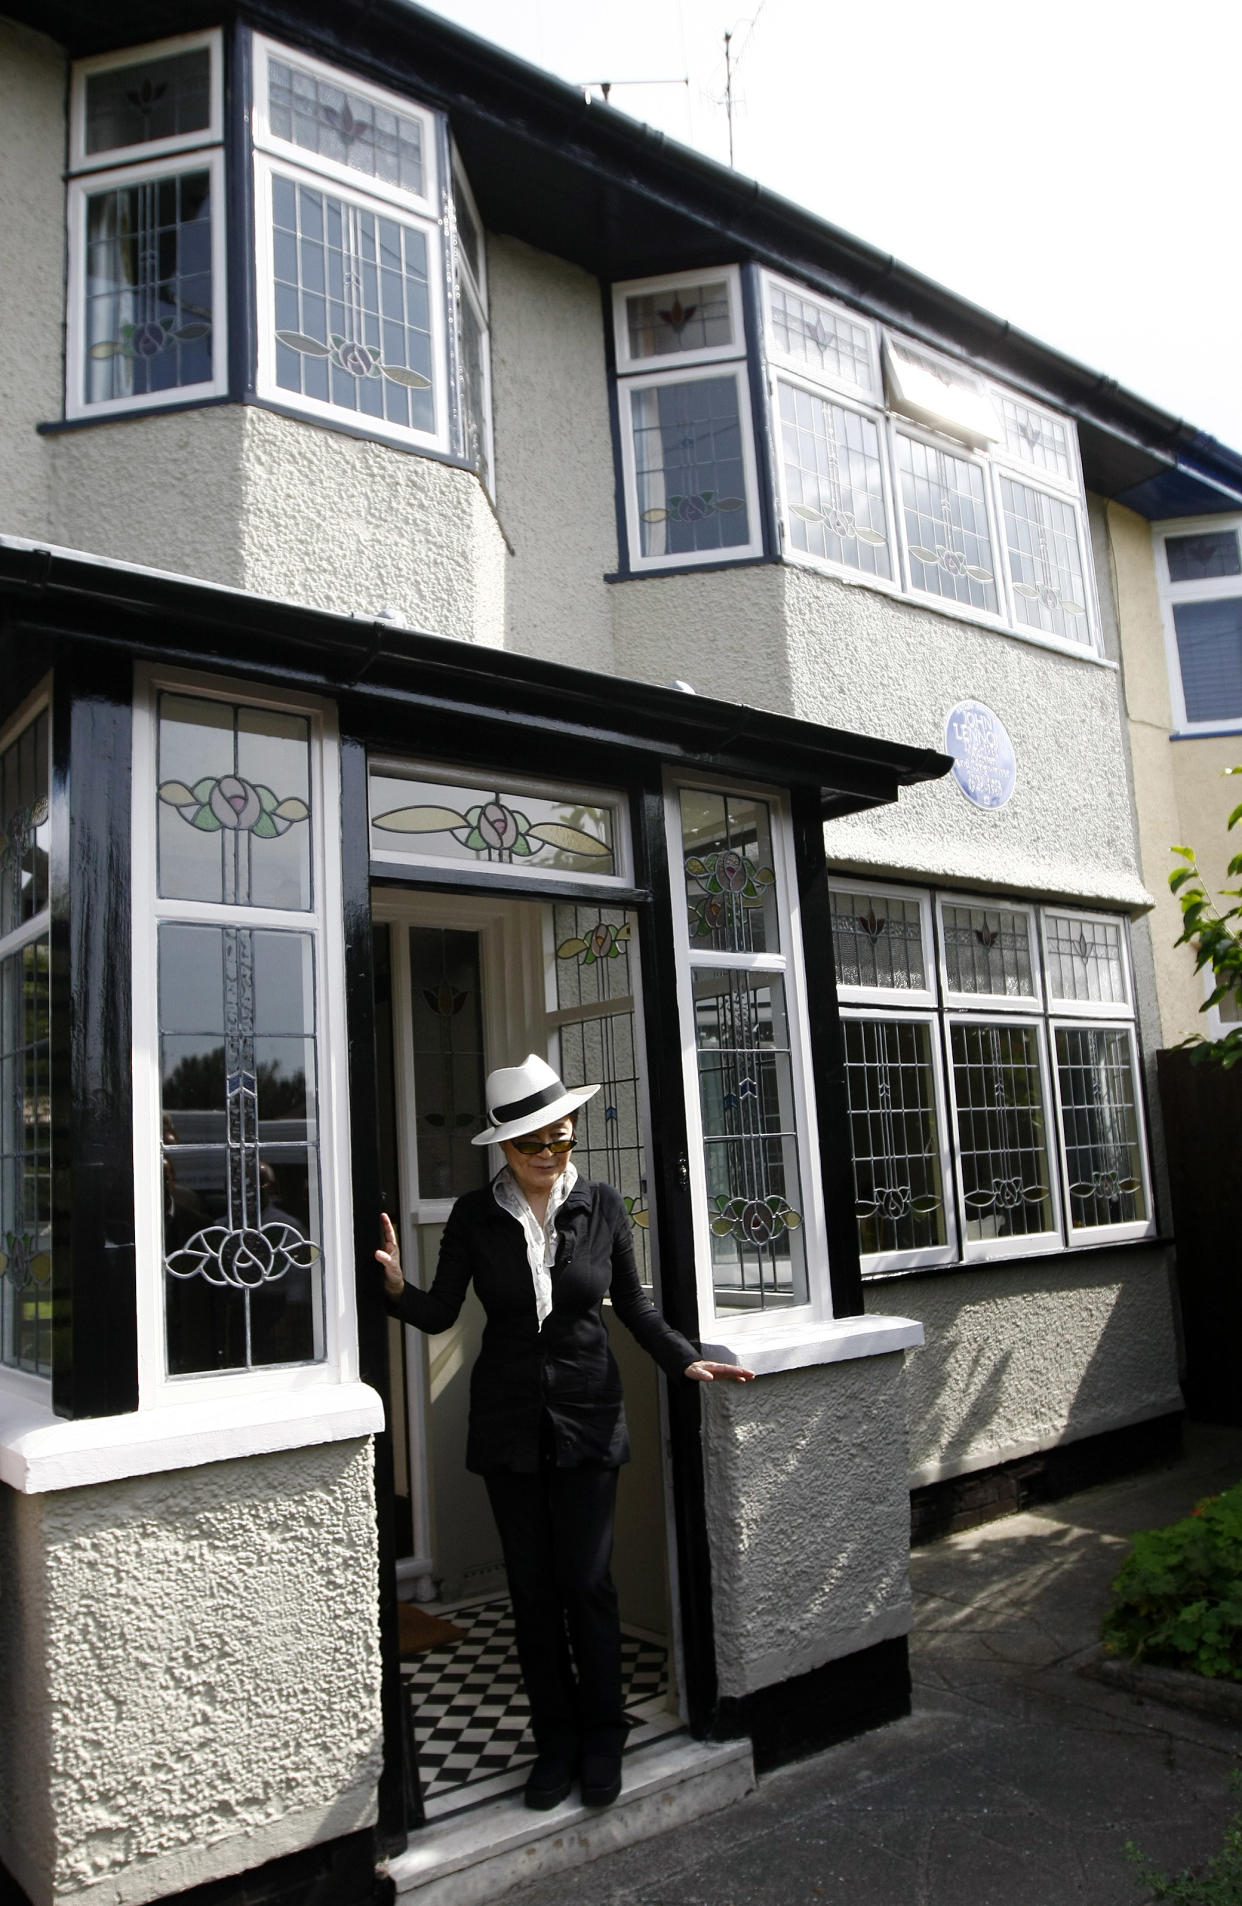 John Lennon's widow Yoko Ono visits his old house in Menlove Avenue, Liverpool, England, Friday, Sept. 3, 2010. (AP Photo/Tim Hales)